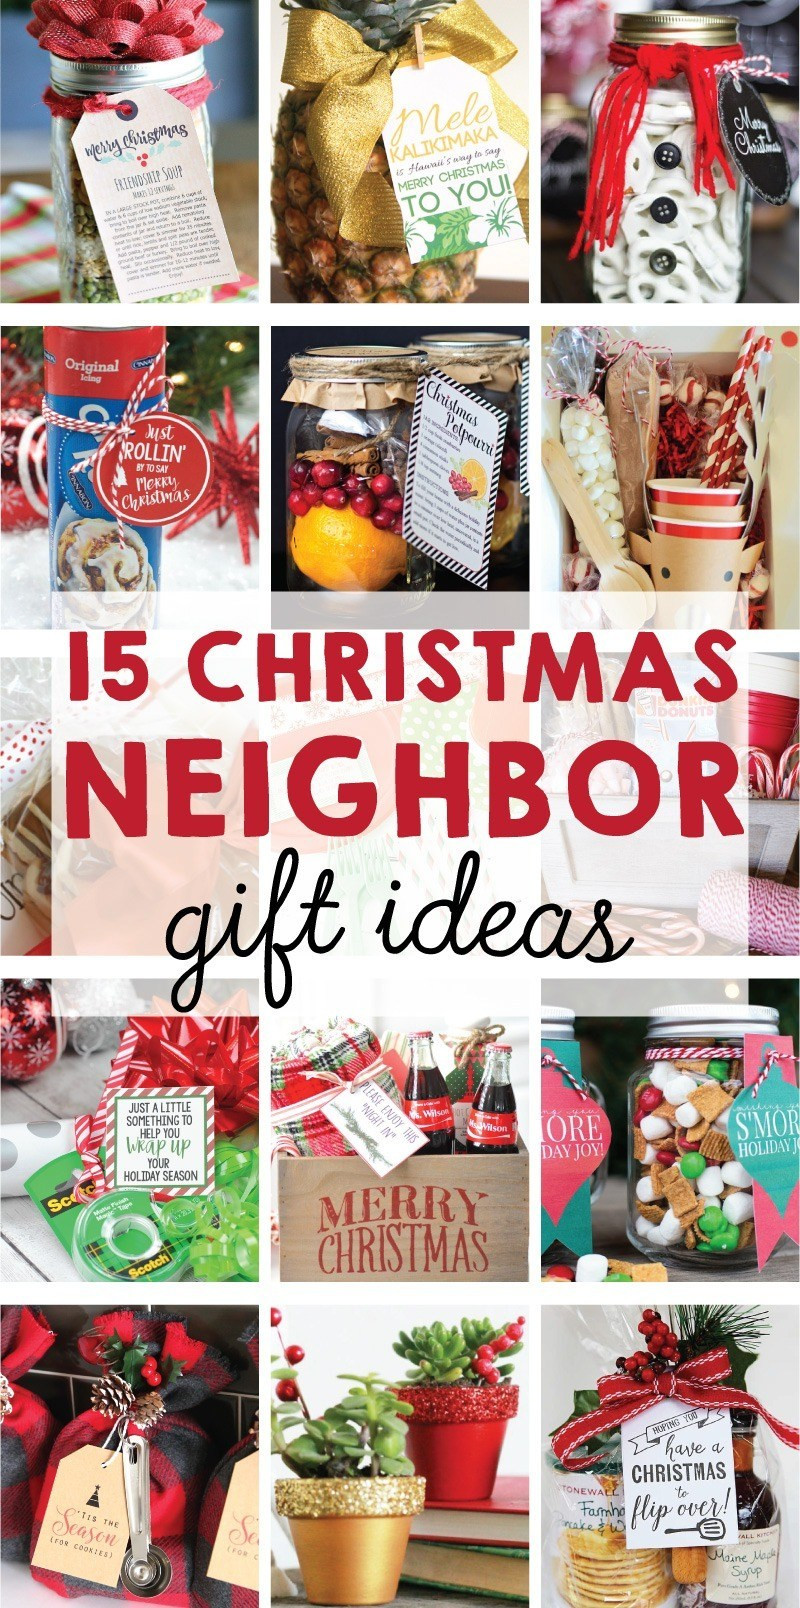 Thank You Gift Ideas For Neighbors
 The BEST 15 Christmas Neighbor Gift Ideas on Love the Day